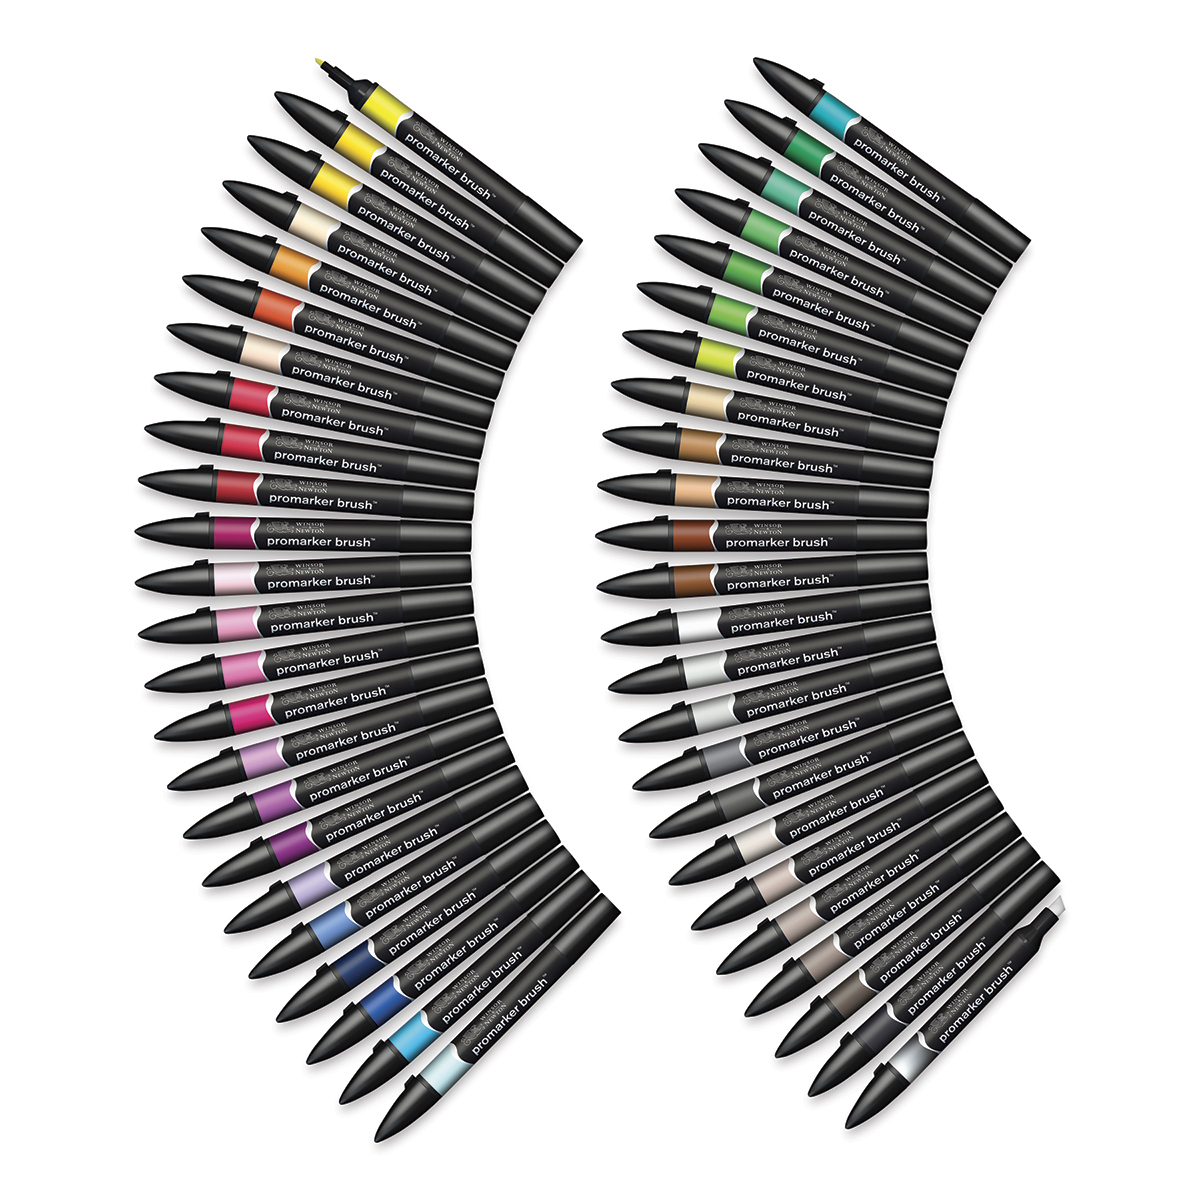 Winsor & Newton - ProMARKER - Box of 48 - ESSENTIAL COLLECTION